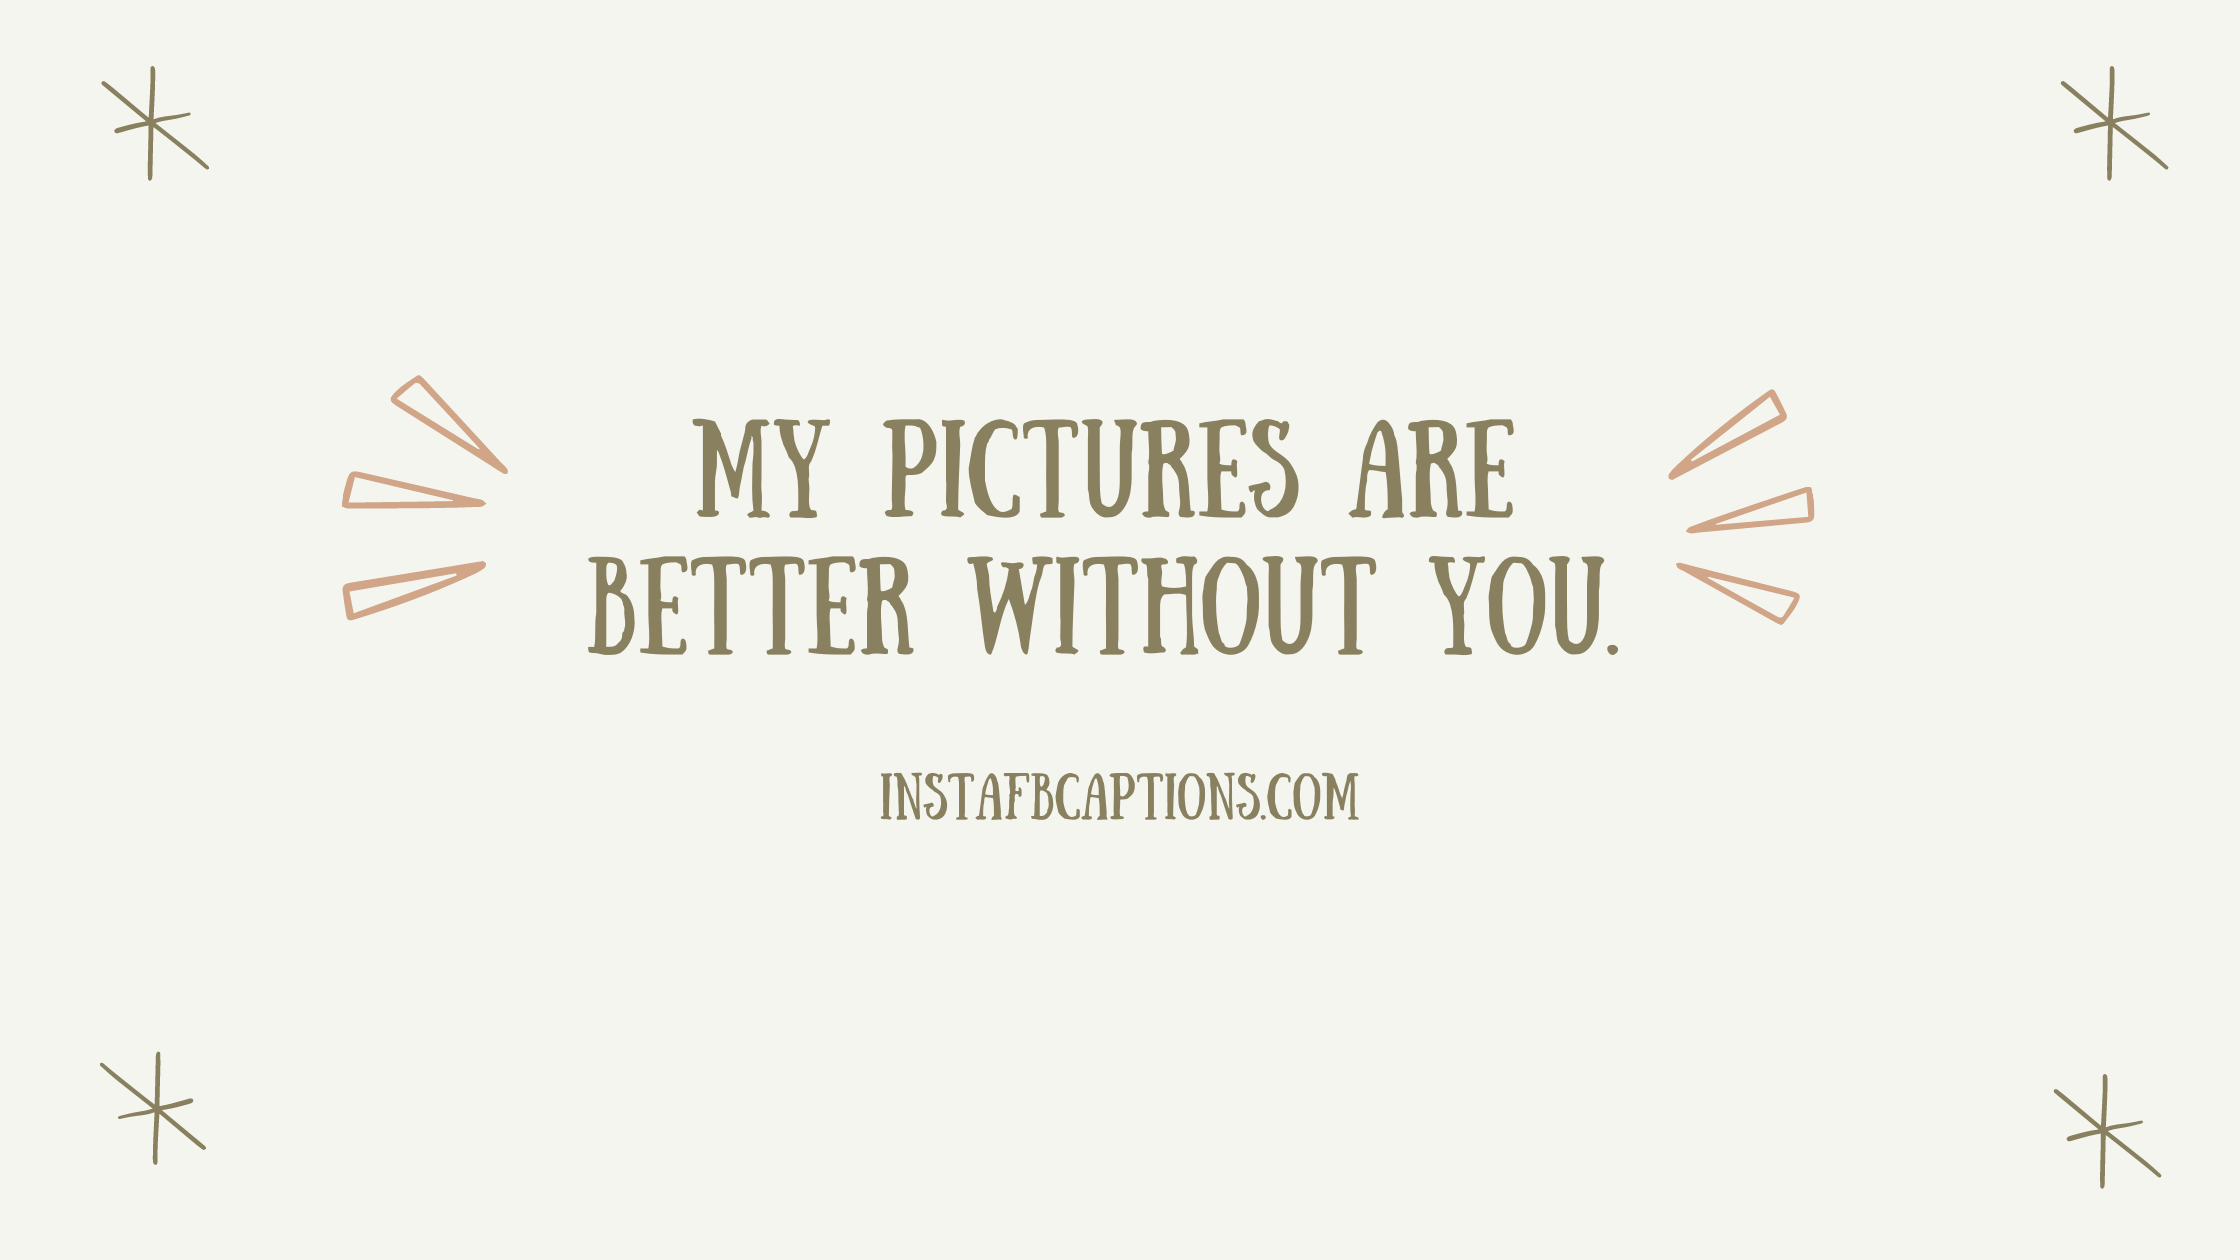 My pictures are better without you.  - Best Captions to Make your Ex Jealous - [Full on Savage] Captions to Make Your Ex Jealous in 2023